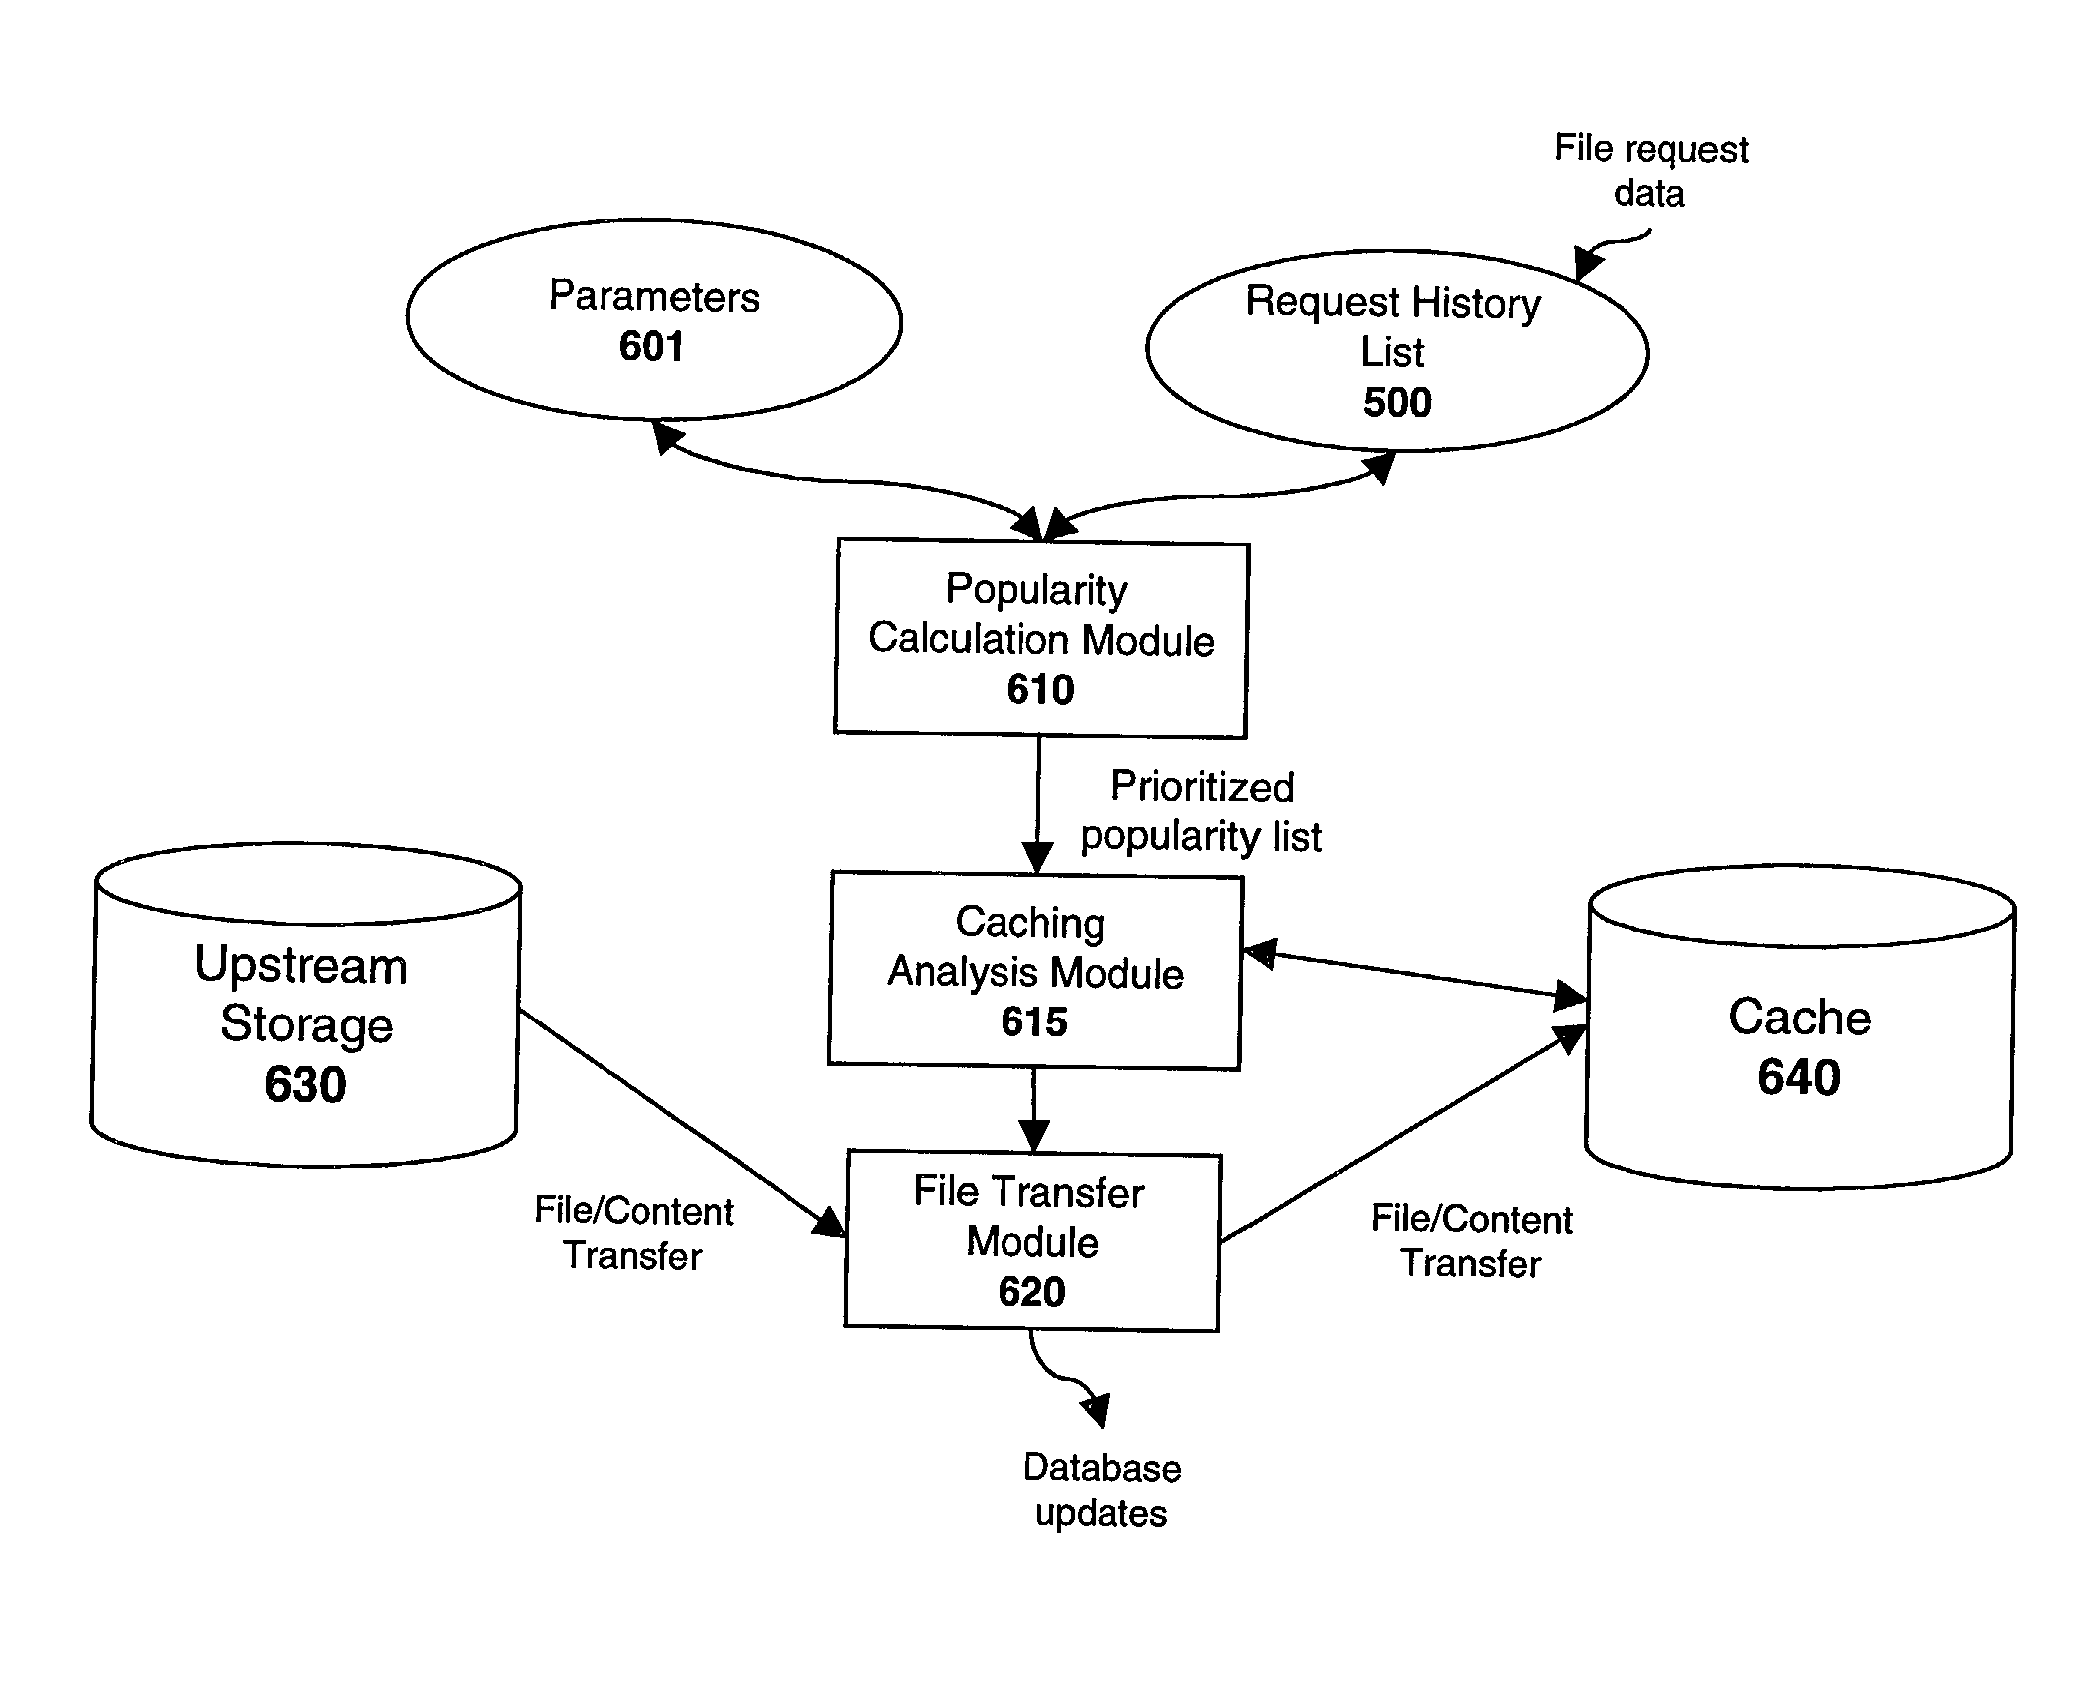 System and method for populating cache servers with popular media contents